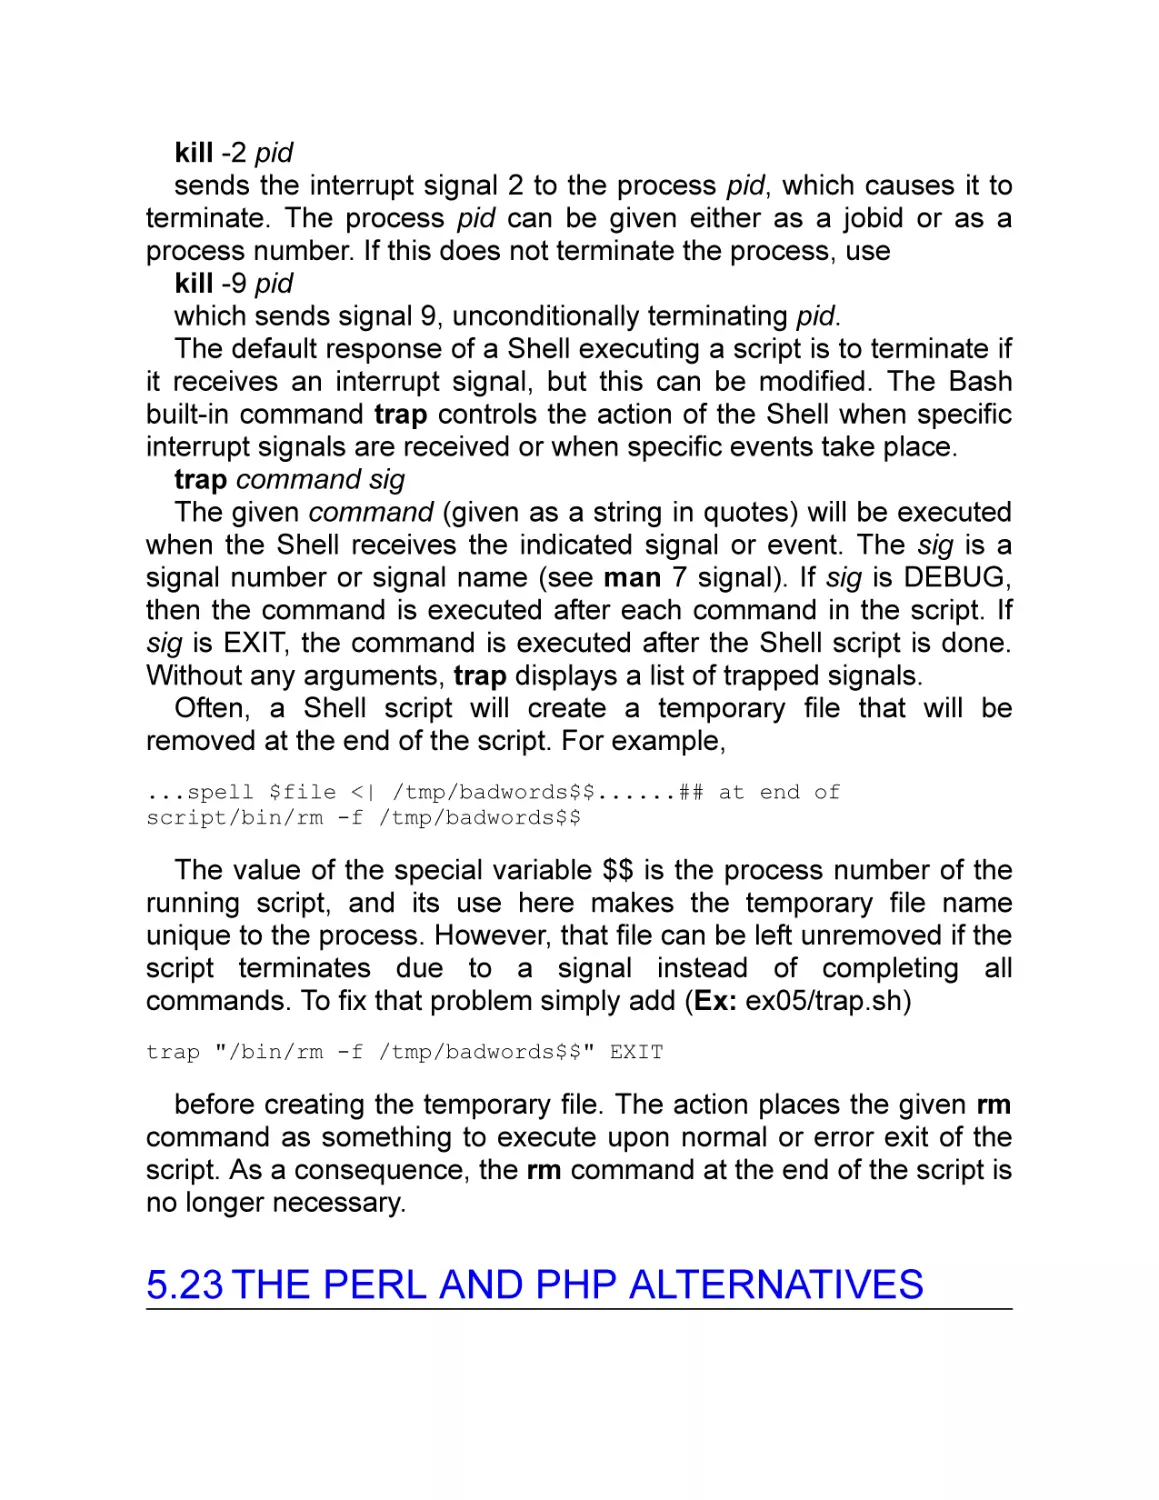 5.23 The Perl and PHP Alternatives